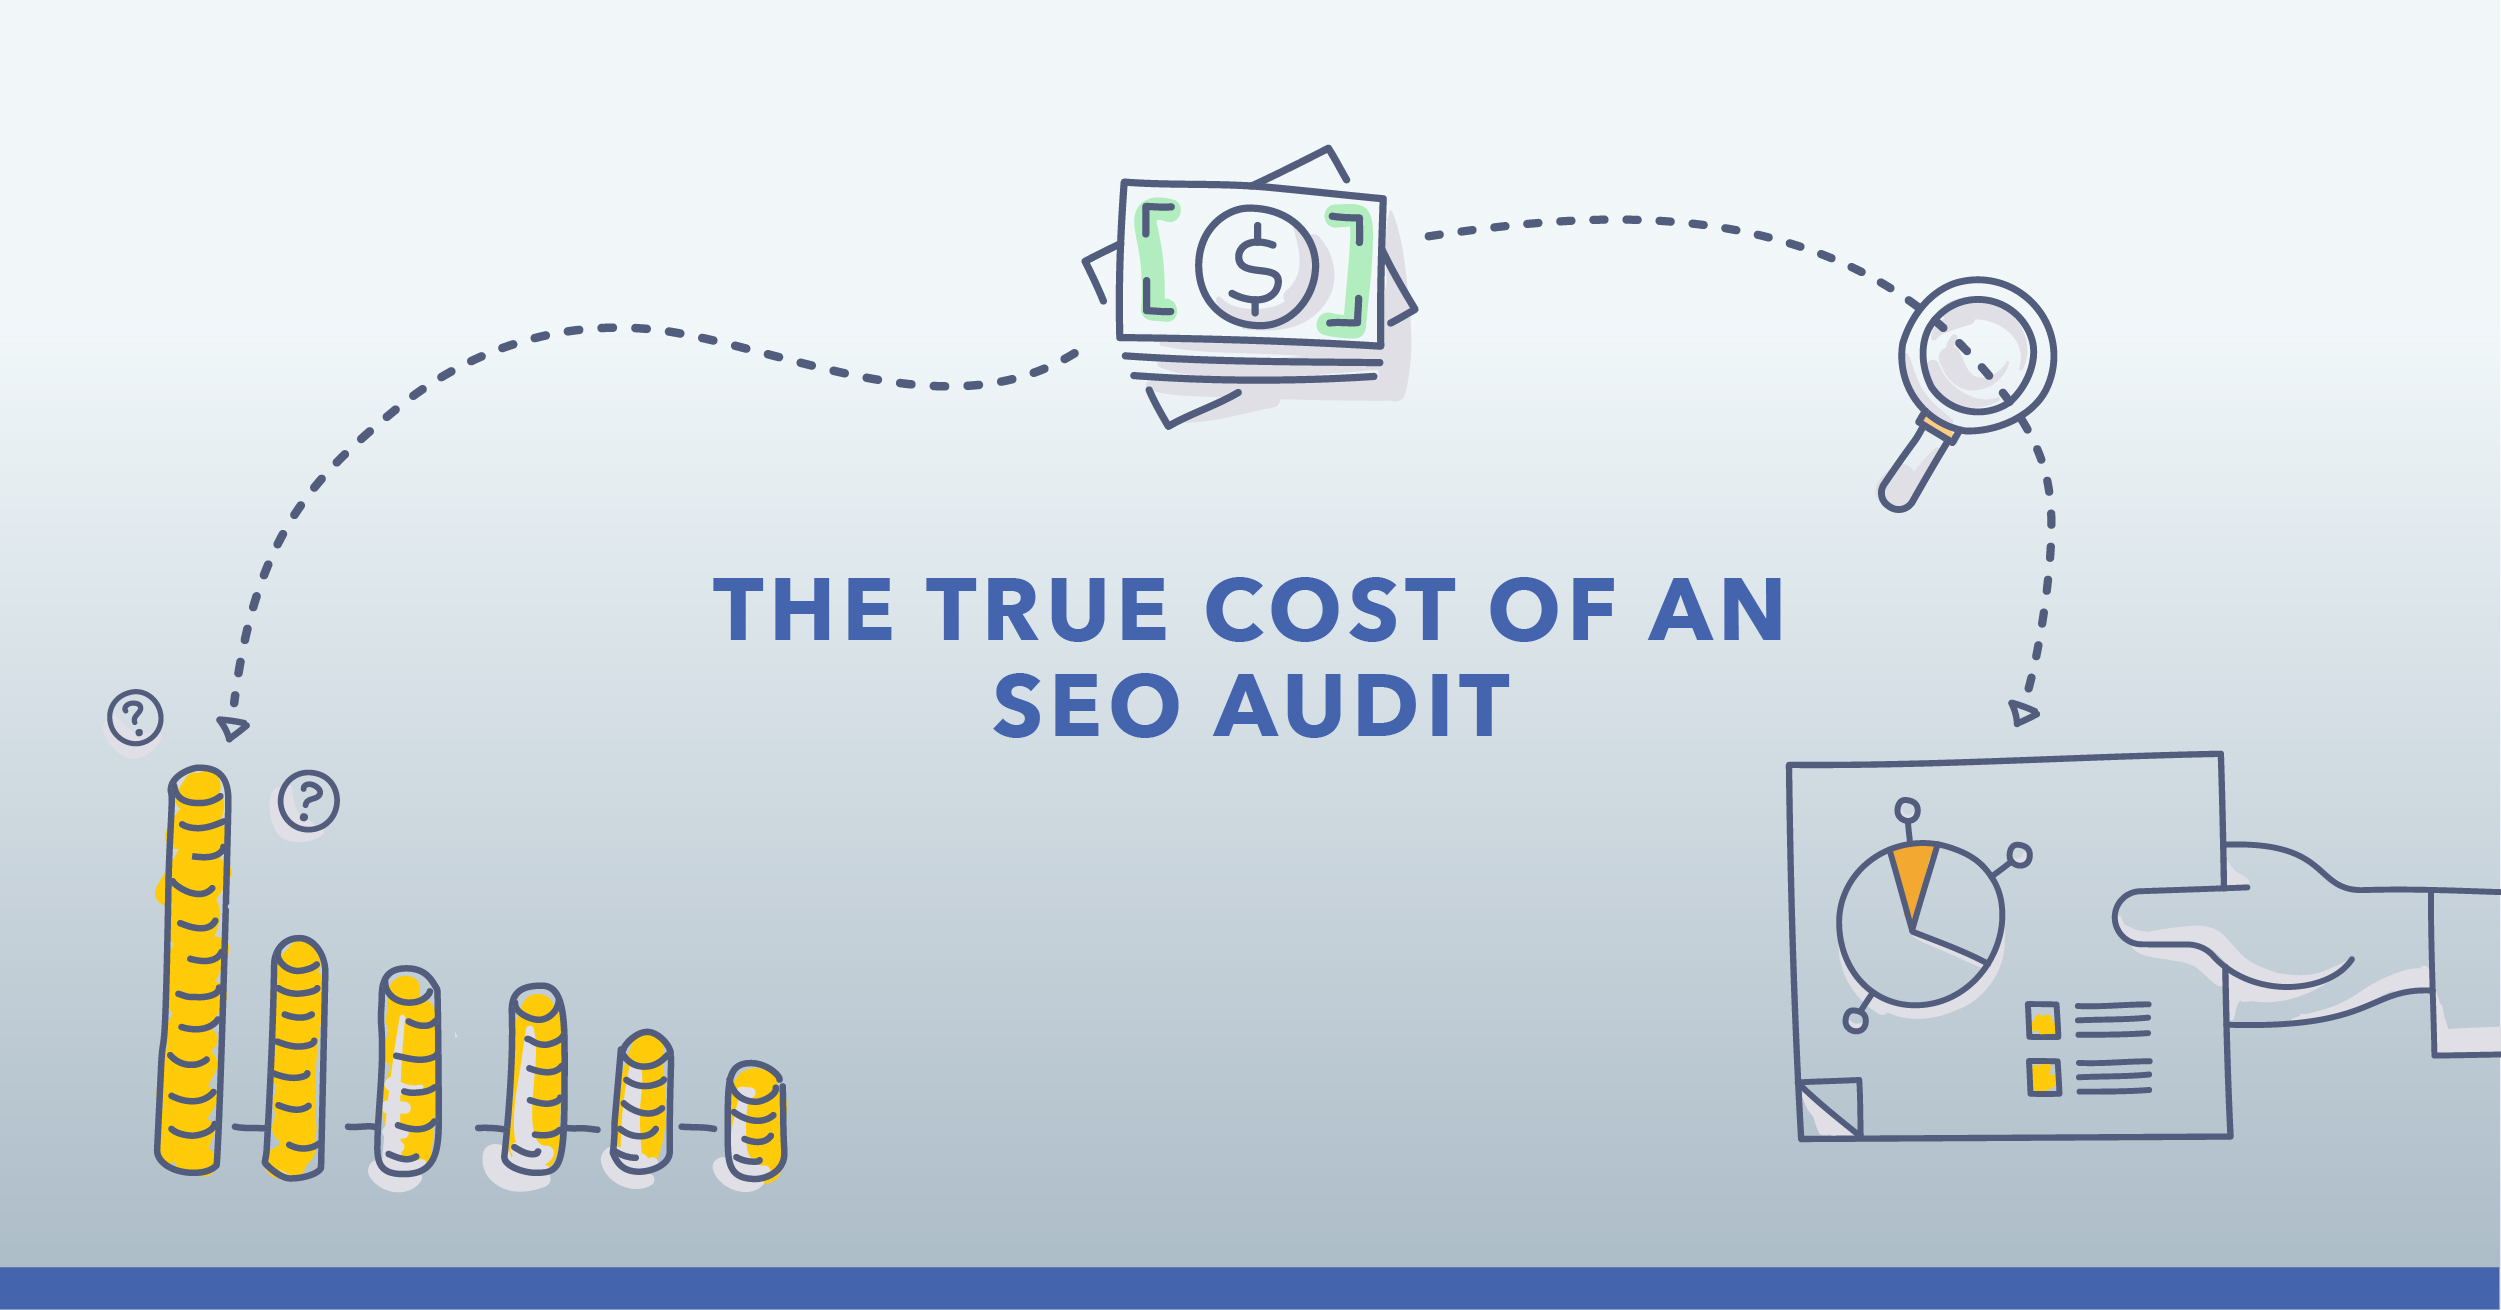 How Much Does an SEO Audit Cost, Really?